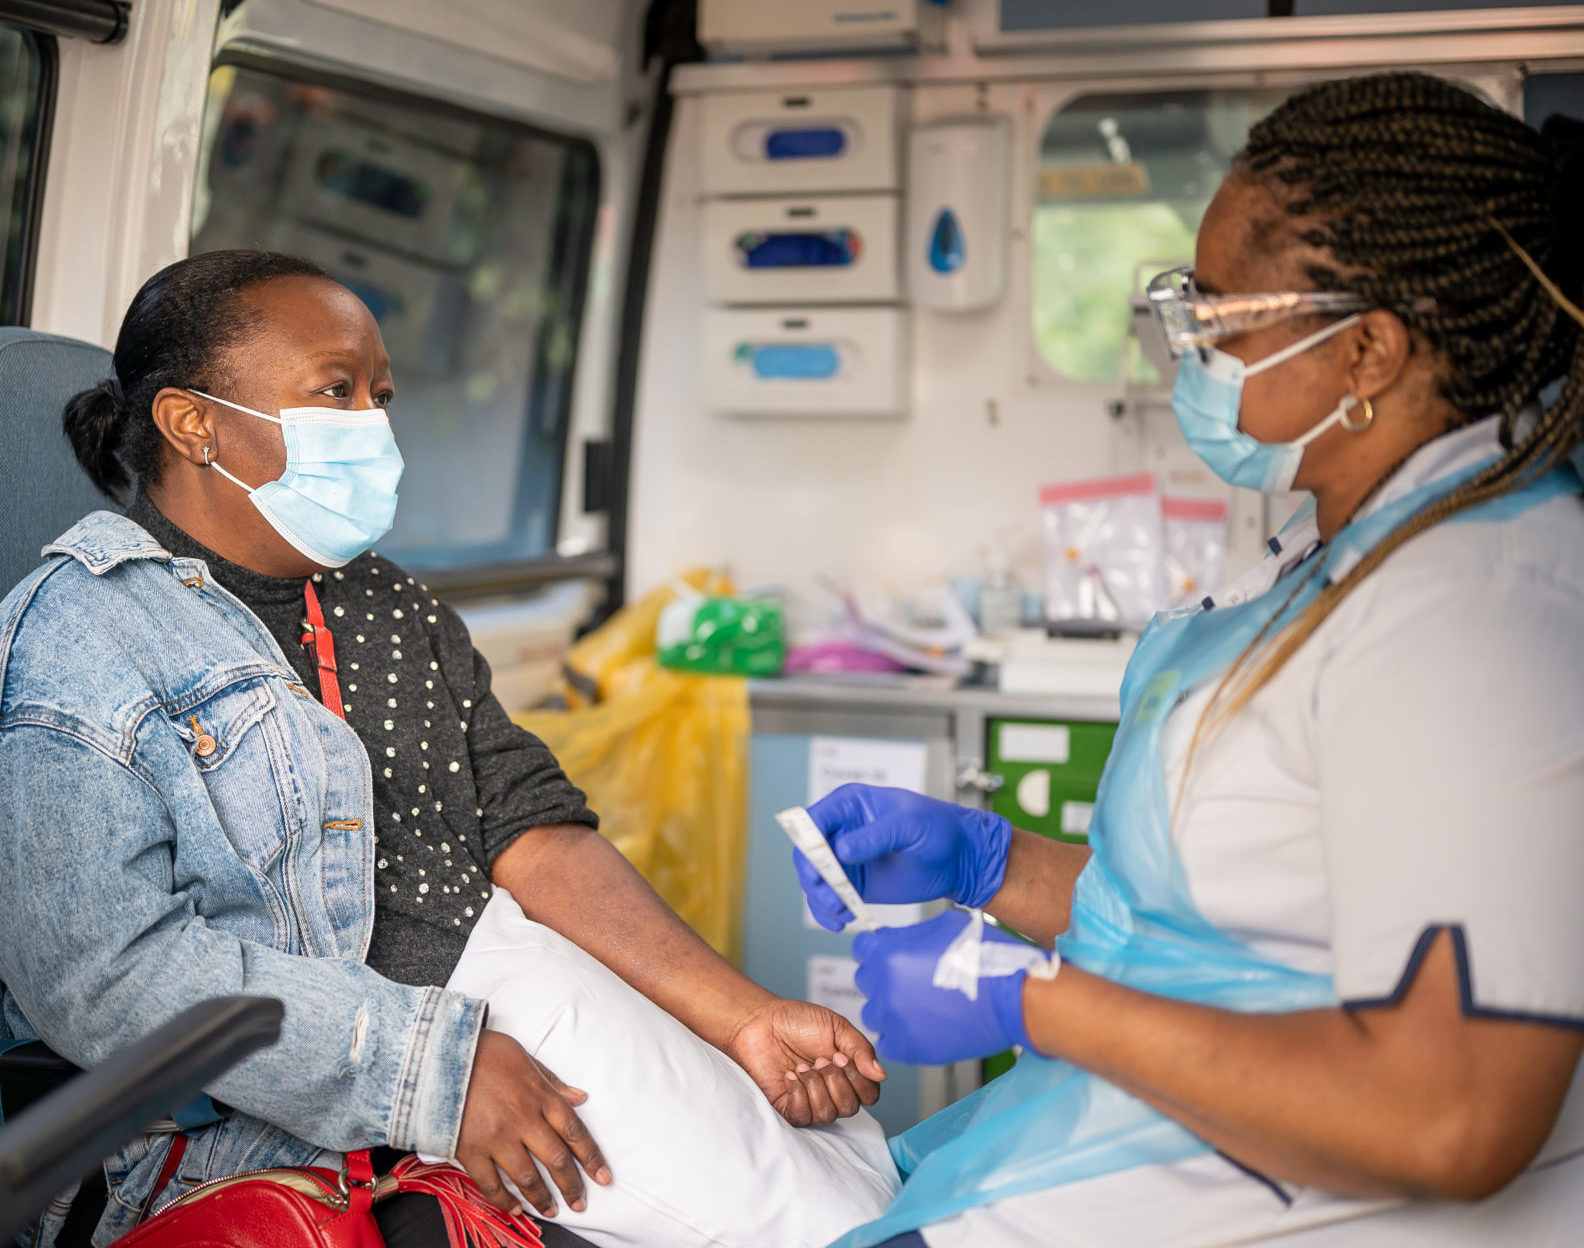 Nurse Jade with patient Patricia, inside the ambulance about to begin tests